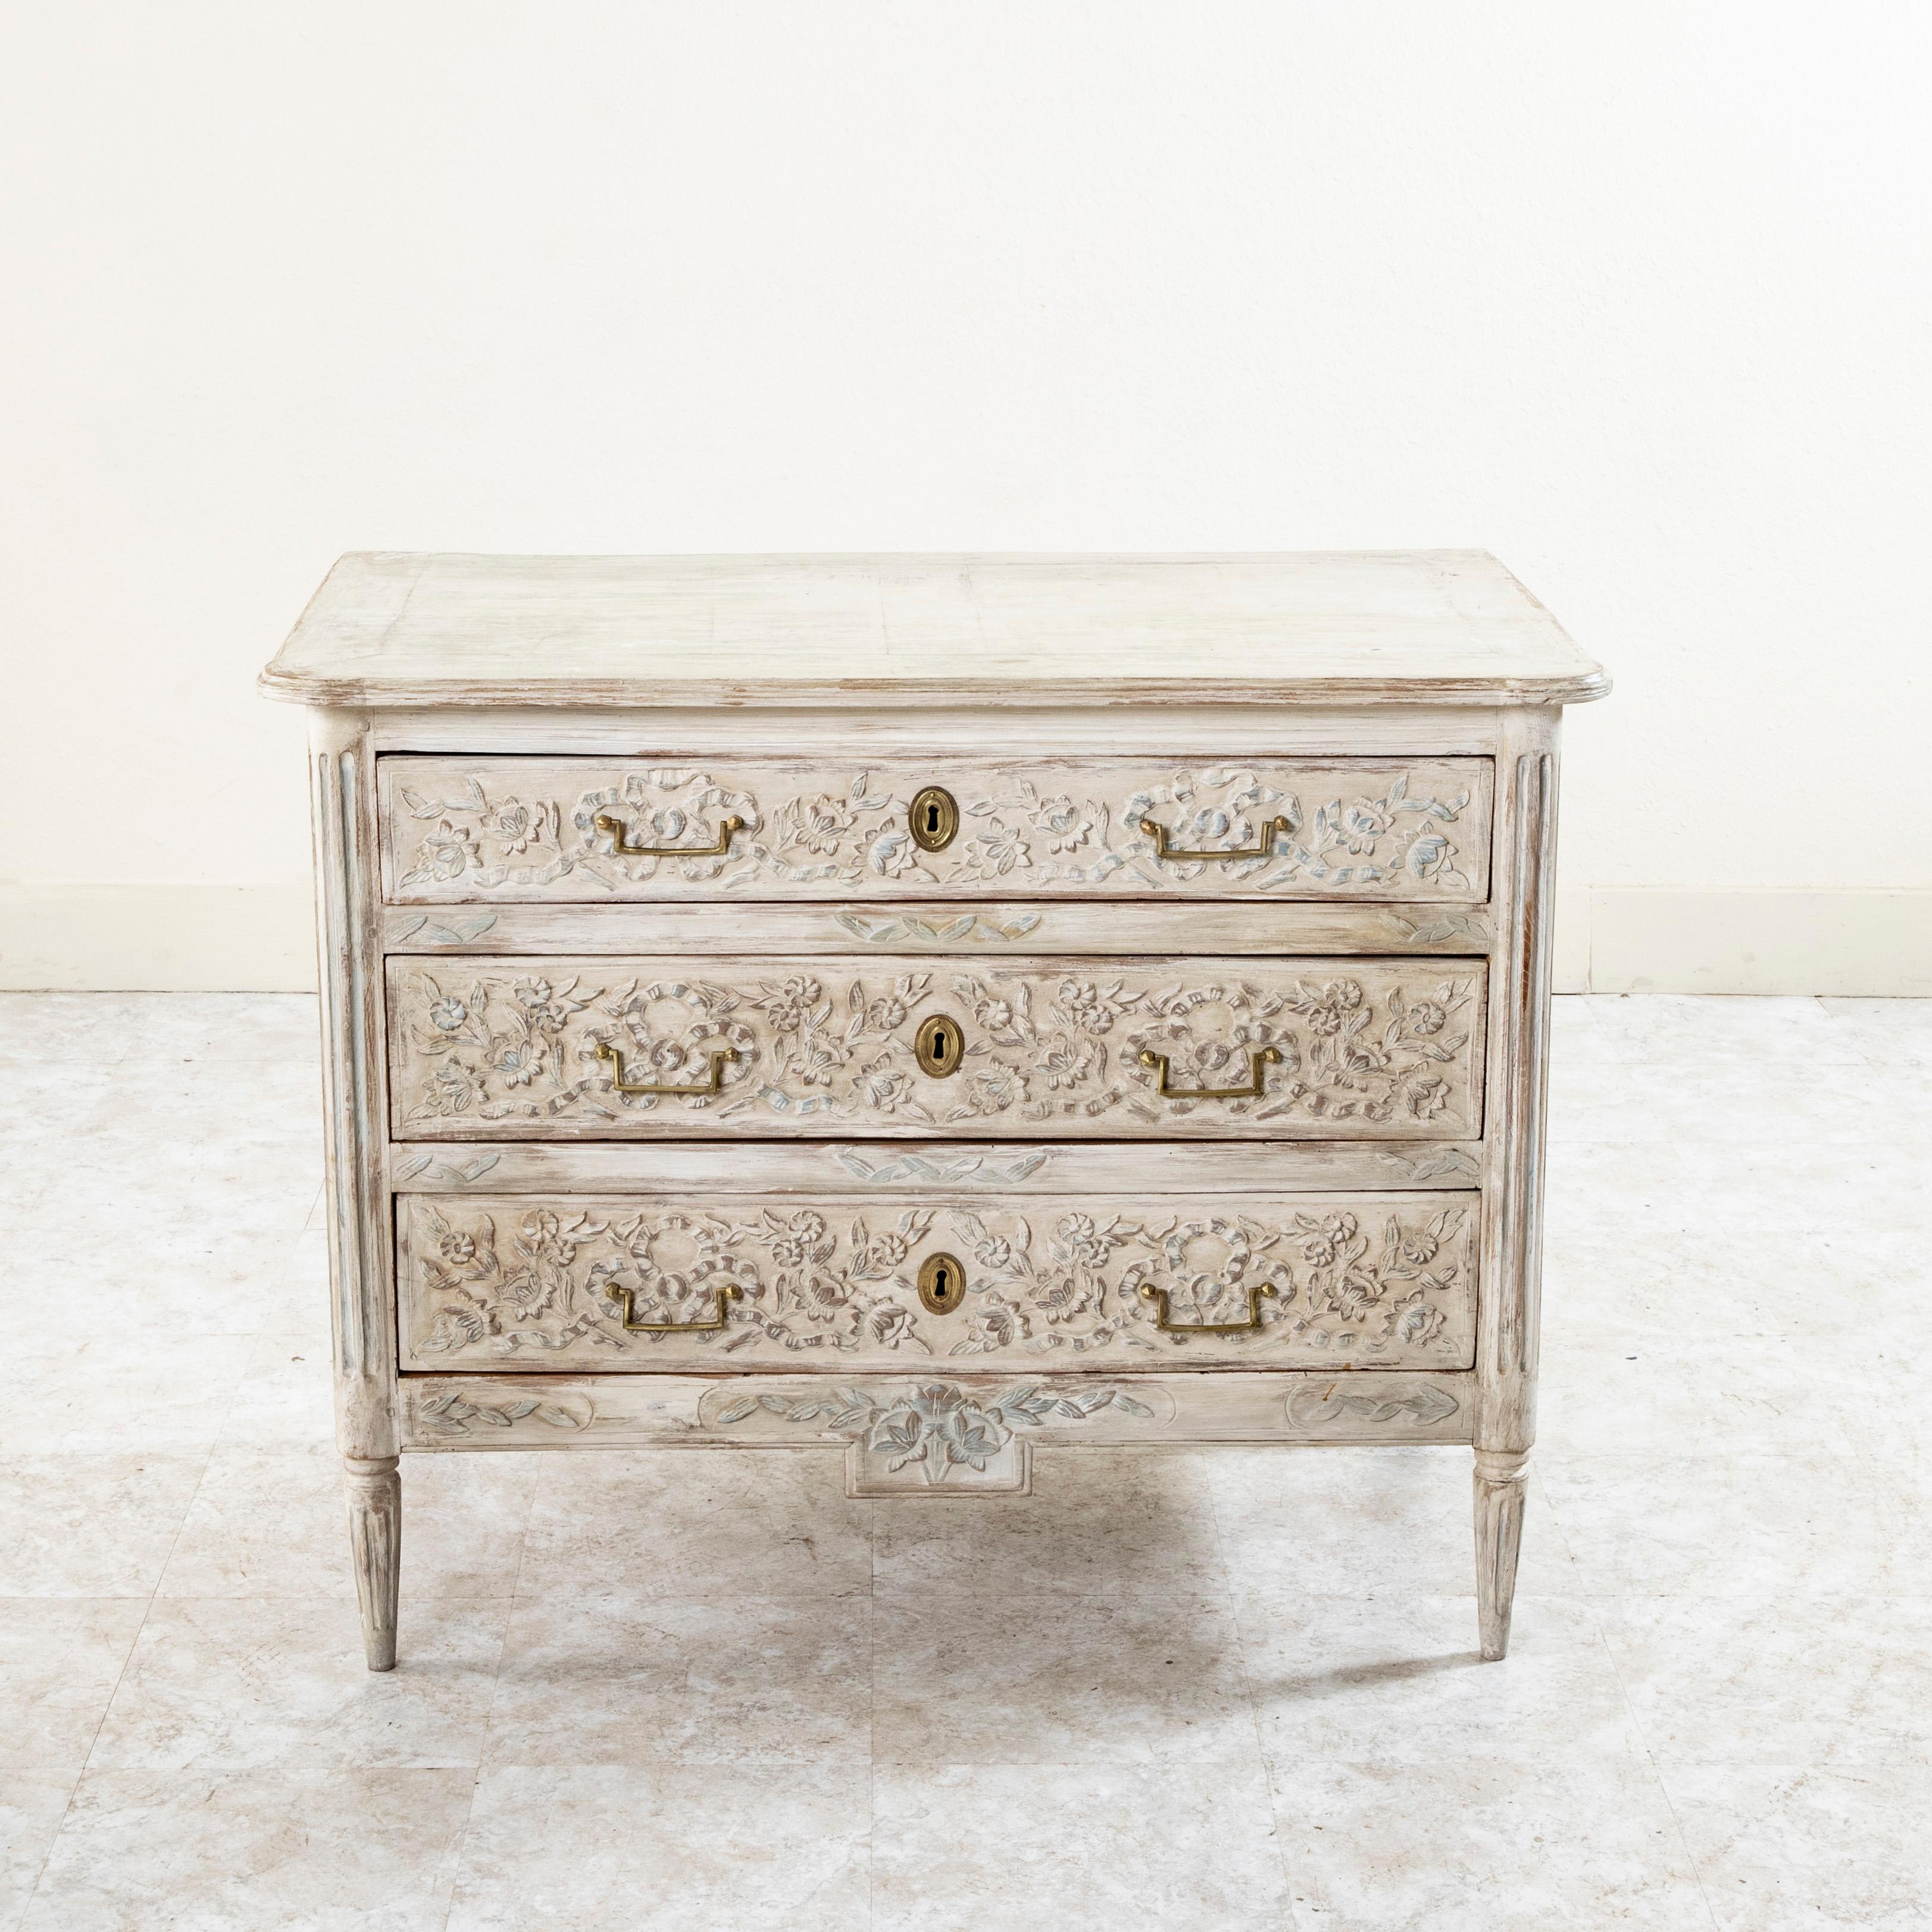 From the region of Provence in southern France, this late eighteenth century Louis XVI period painted commode or chest of drawers features hand pegged paneled sides and hand carved details of classic knotted ribbons and garlands of flowers on the